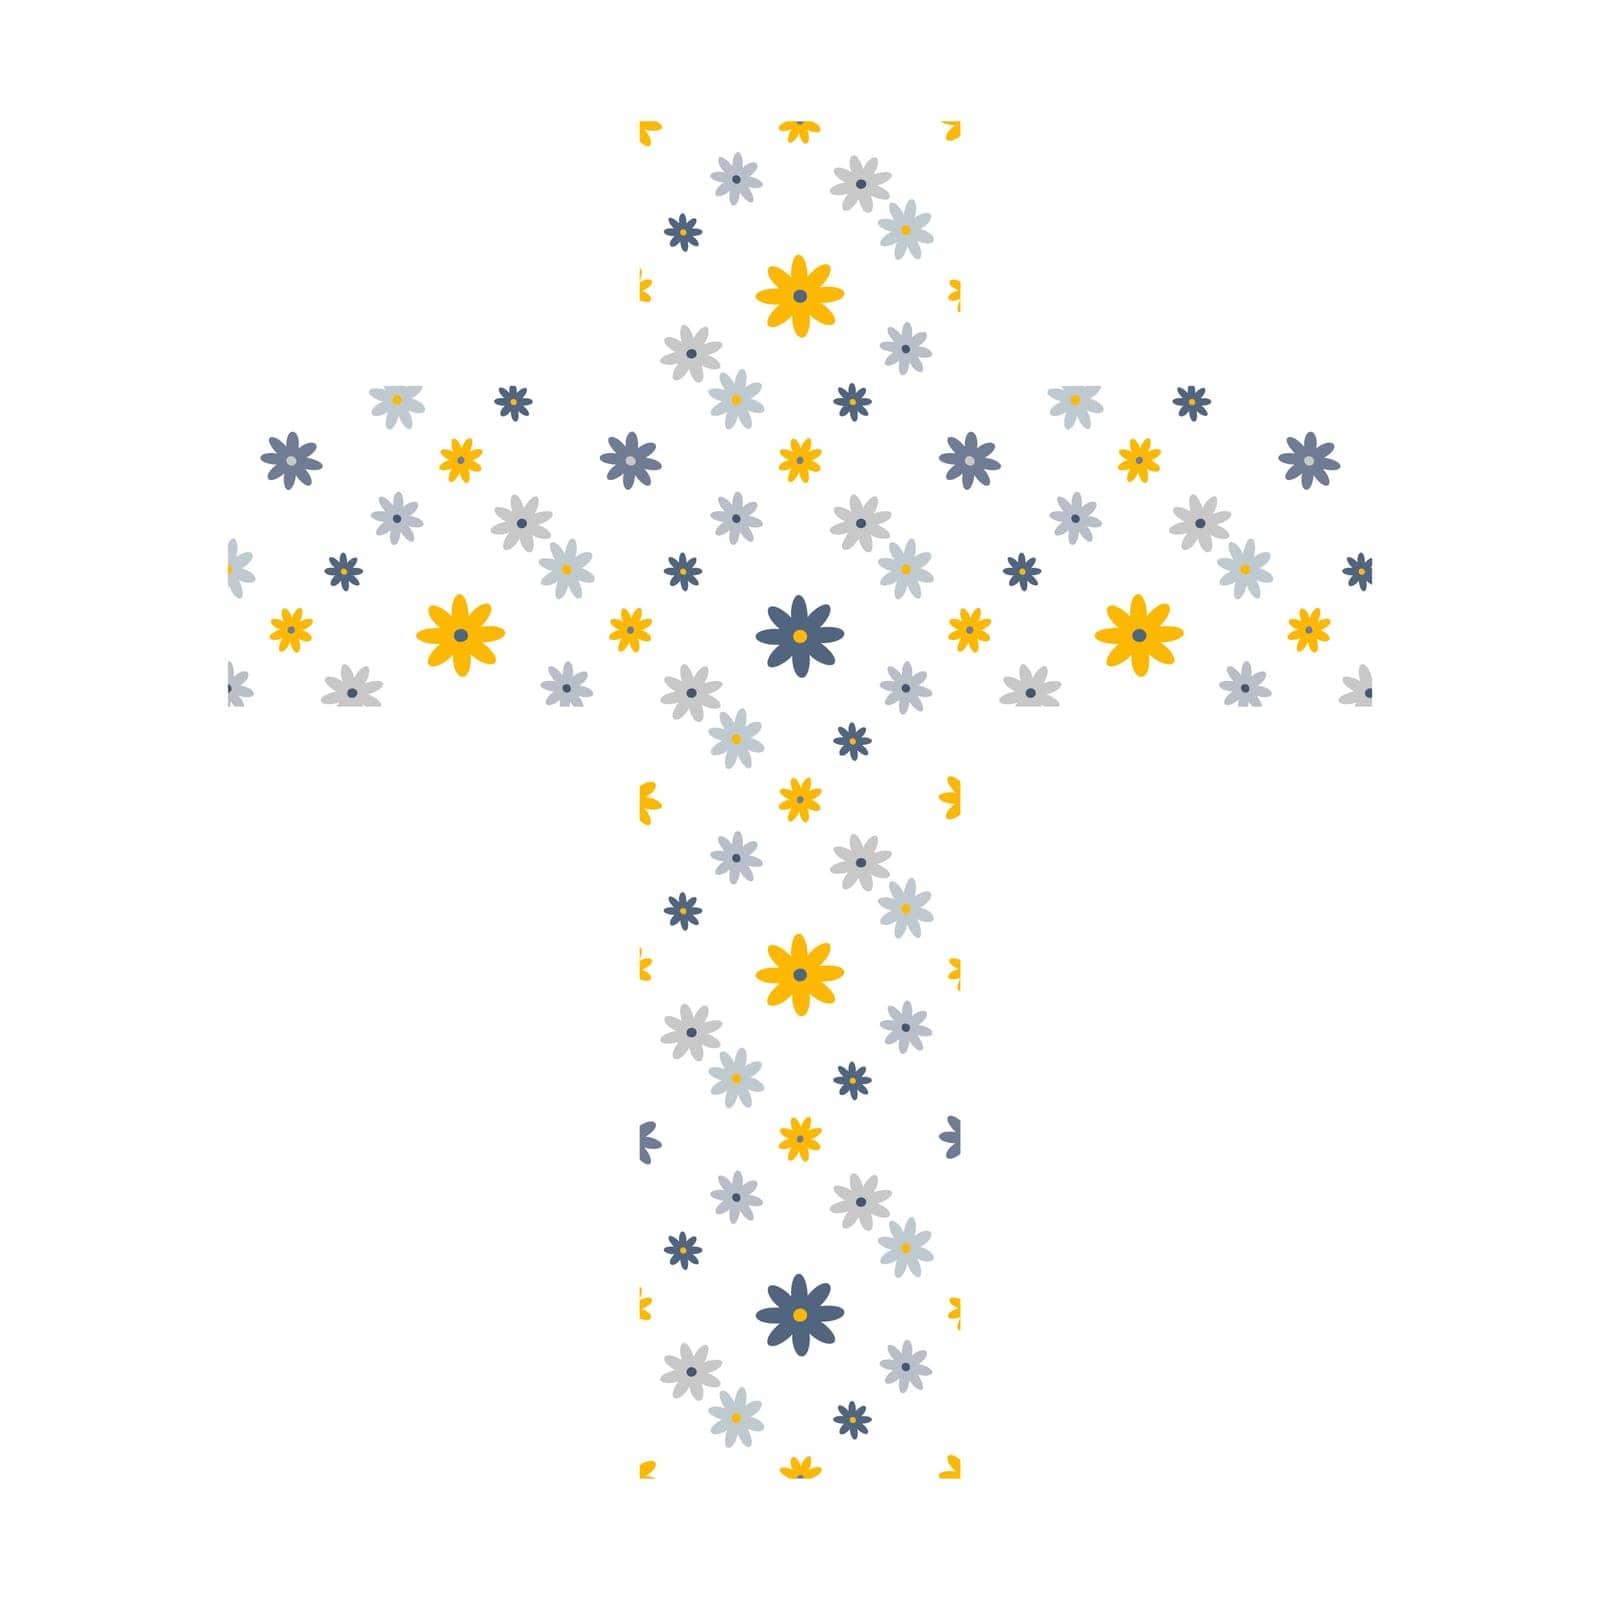 vector illustration of religious cross with spring flowers in minimalistic style